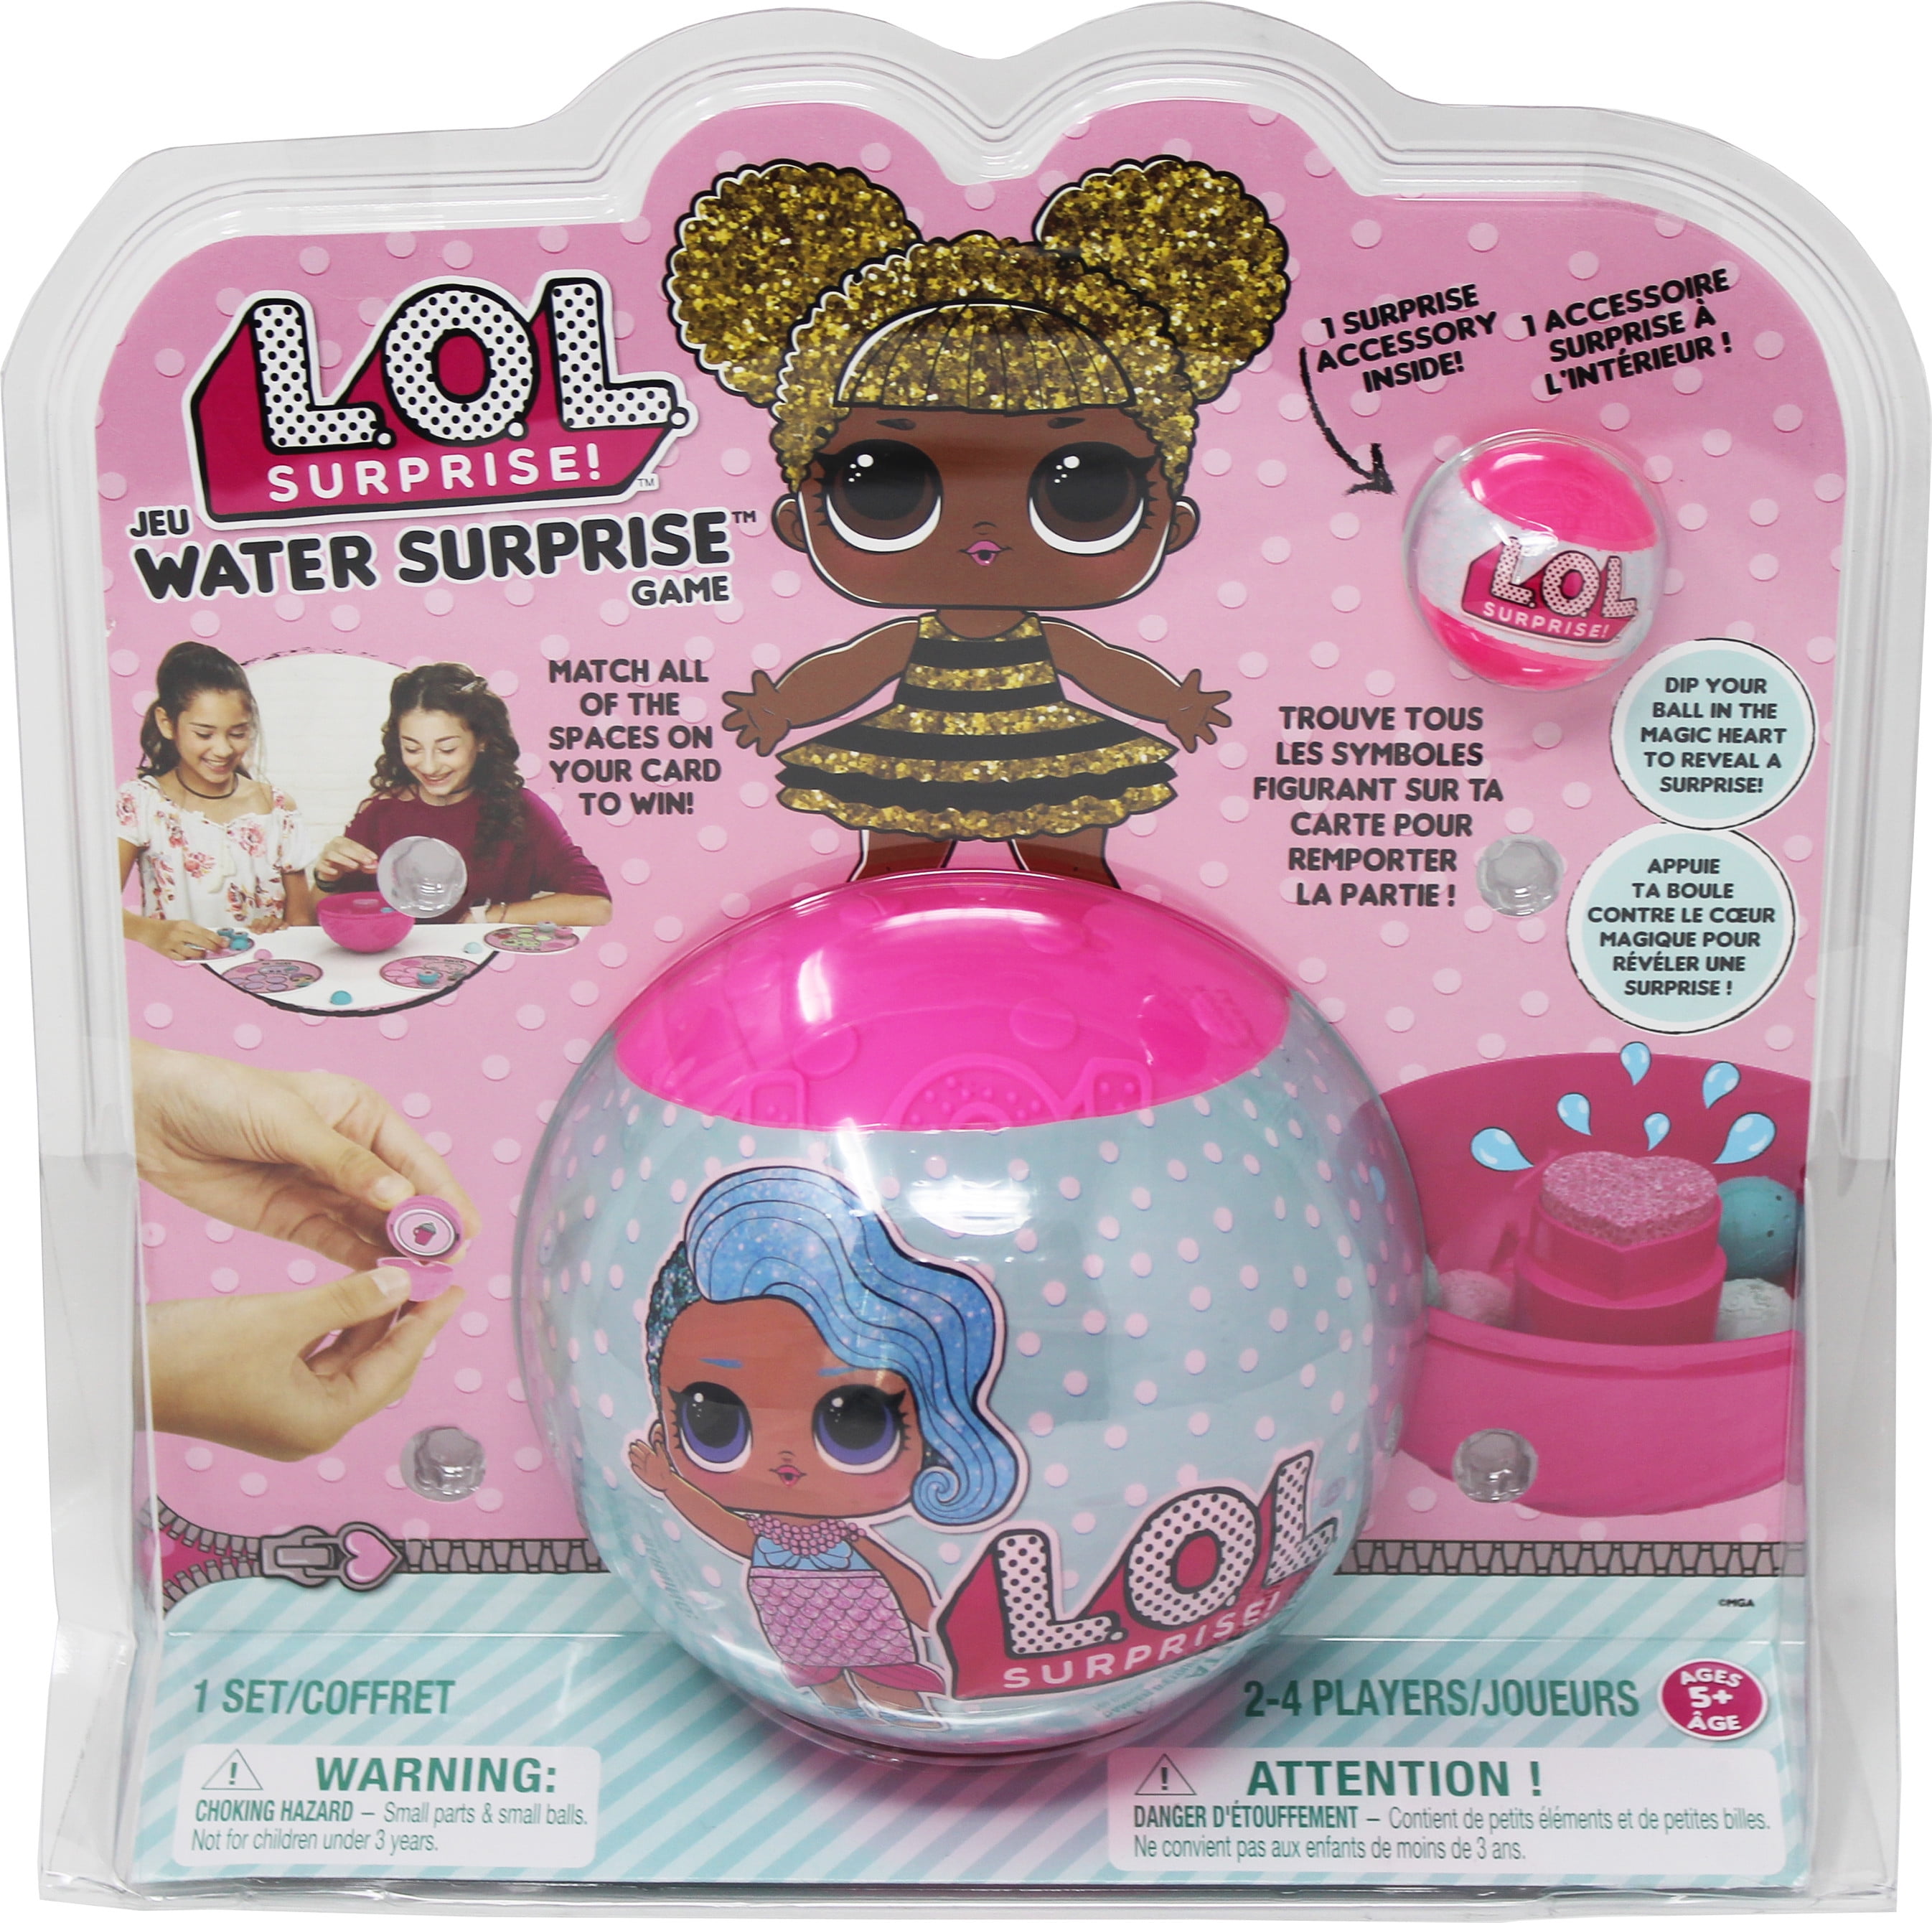 LOL Surprise Doll 7 Layers Of Fun The Game ~L.O.L Board Game ~ NEW GENUINE 